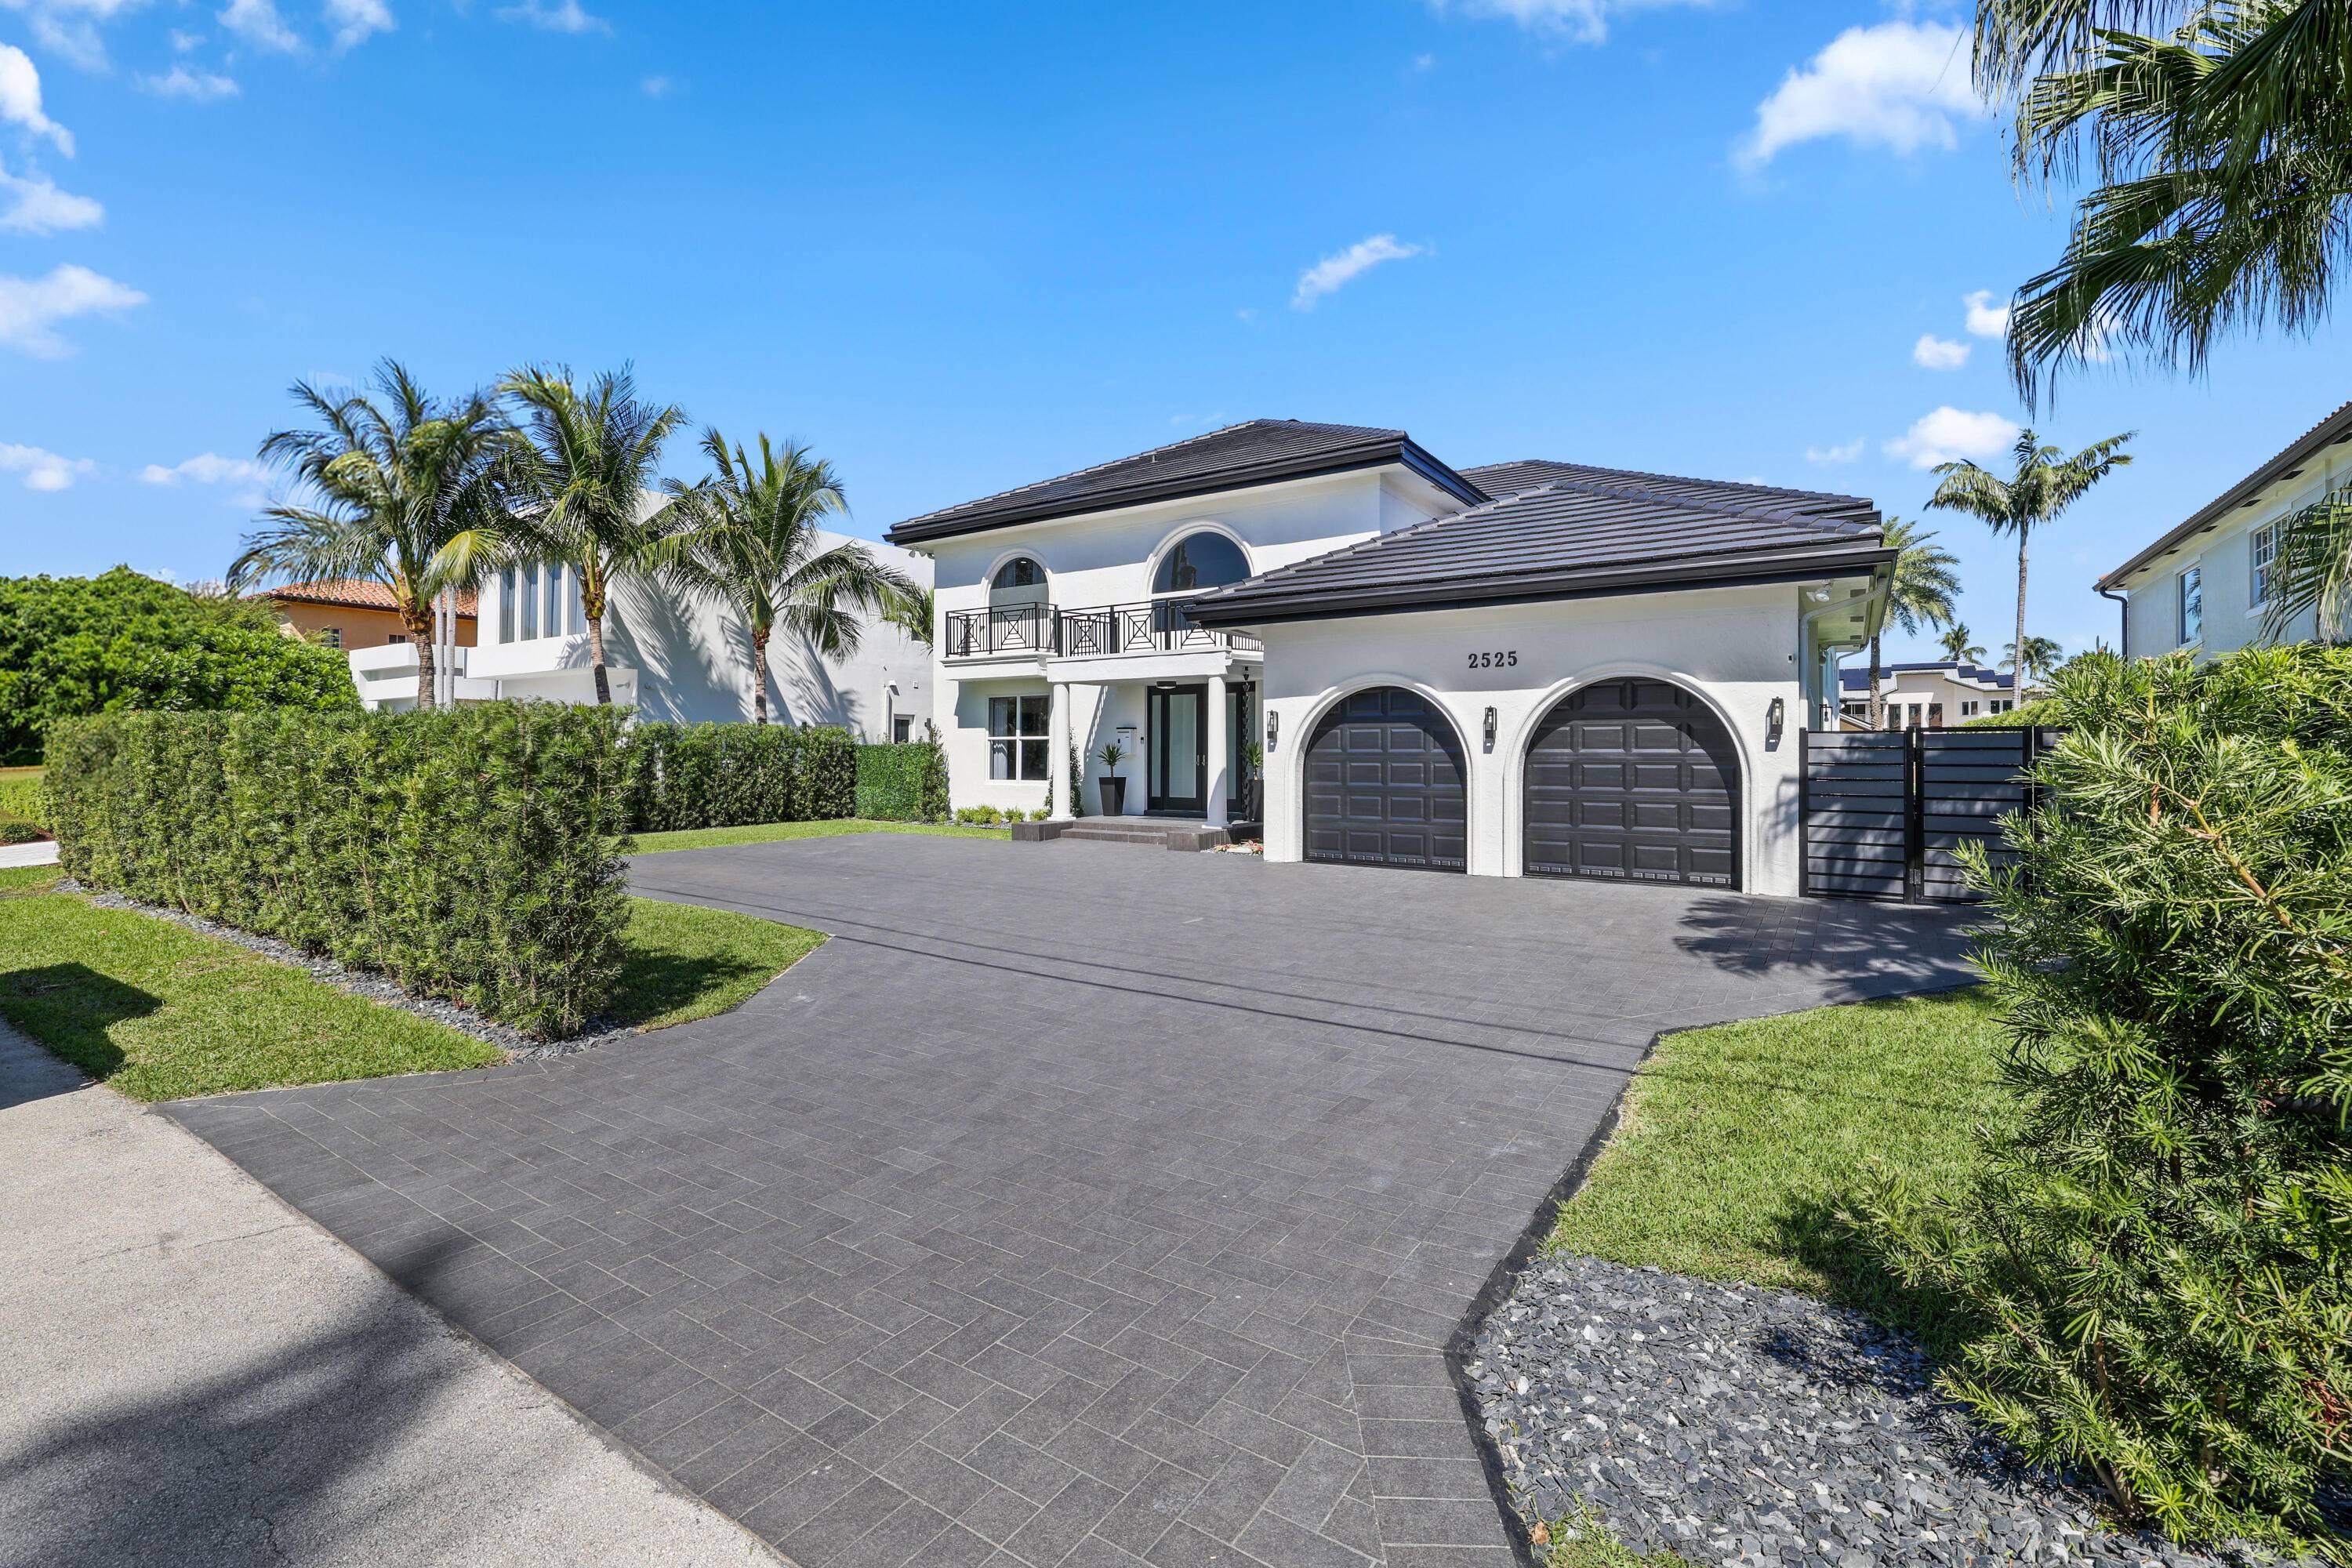 Luxurious Waterfront Retreat in Prestigious Seven IslesDiscover unparalleled waterfront living in this meticulously cared for residence nestled within the coveted Seven Isles community off Las Olas, the global yachting capital.